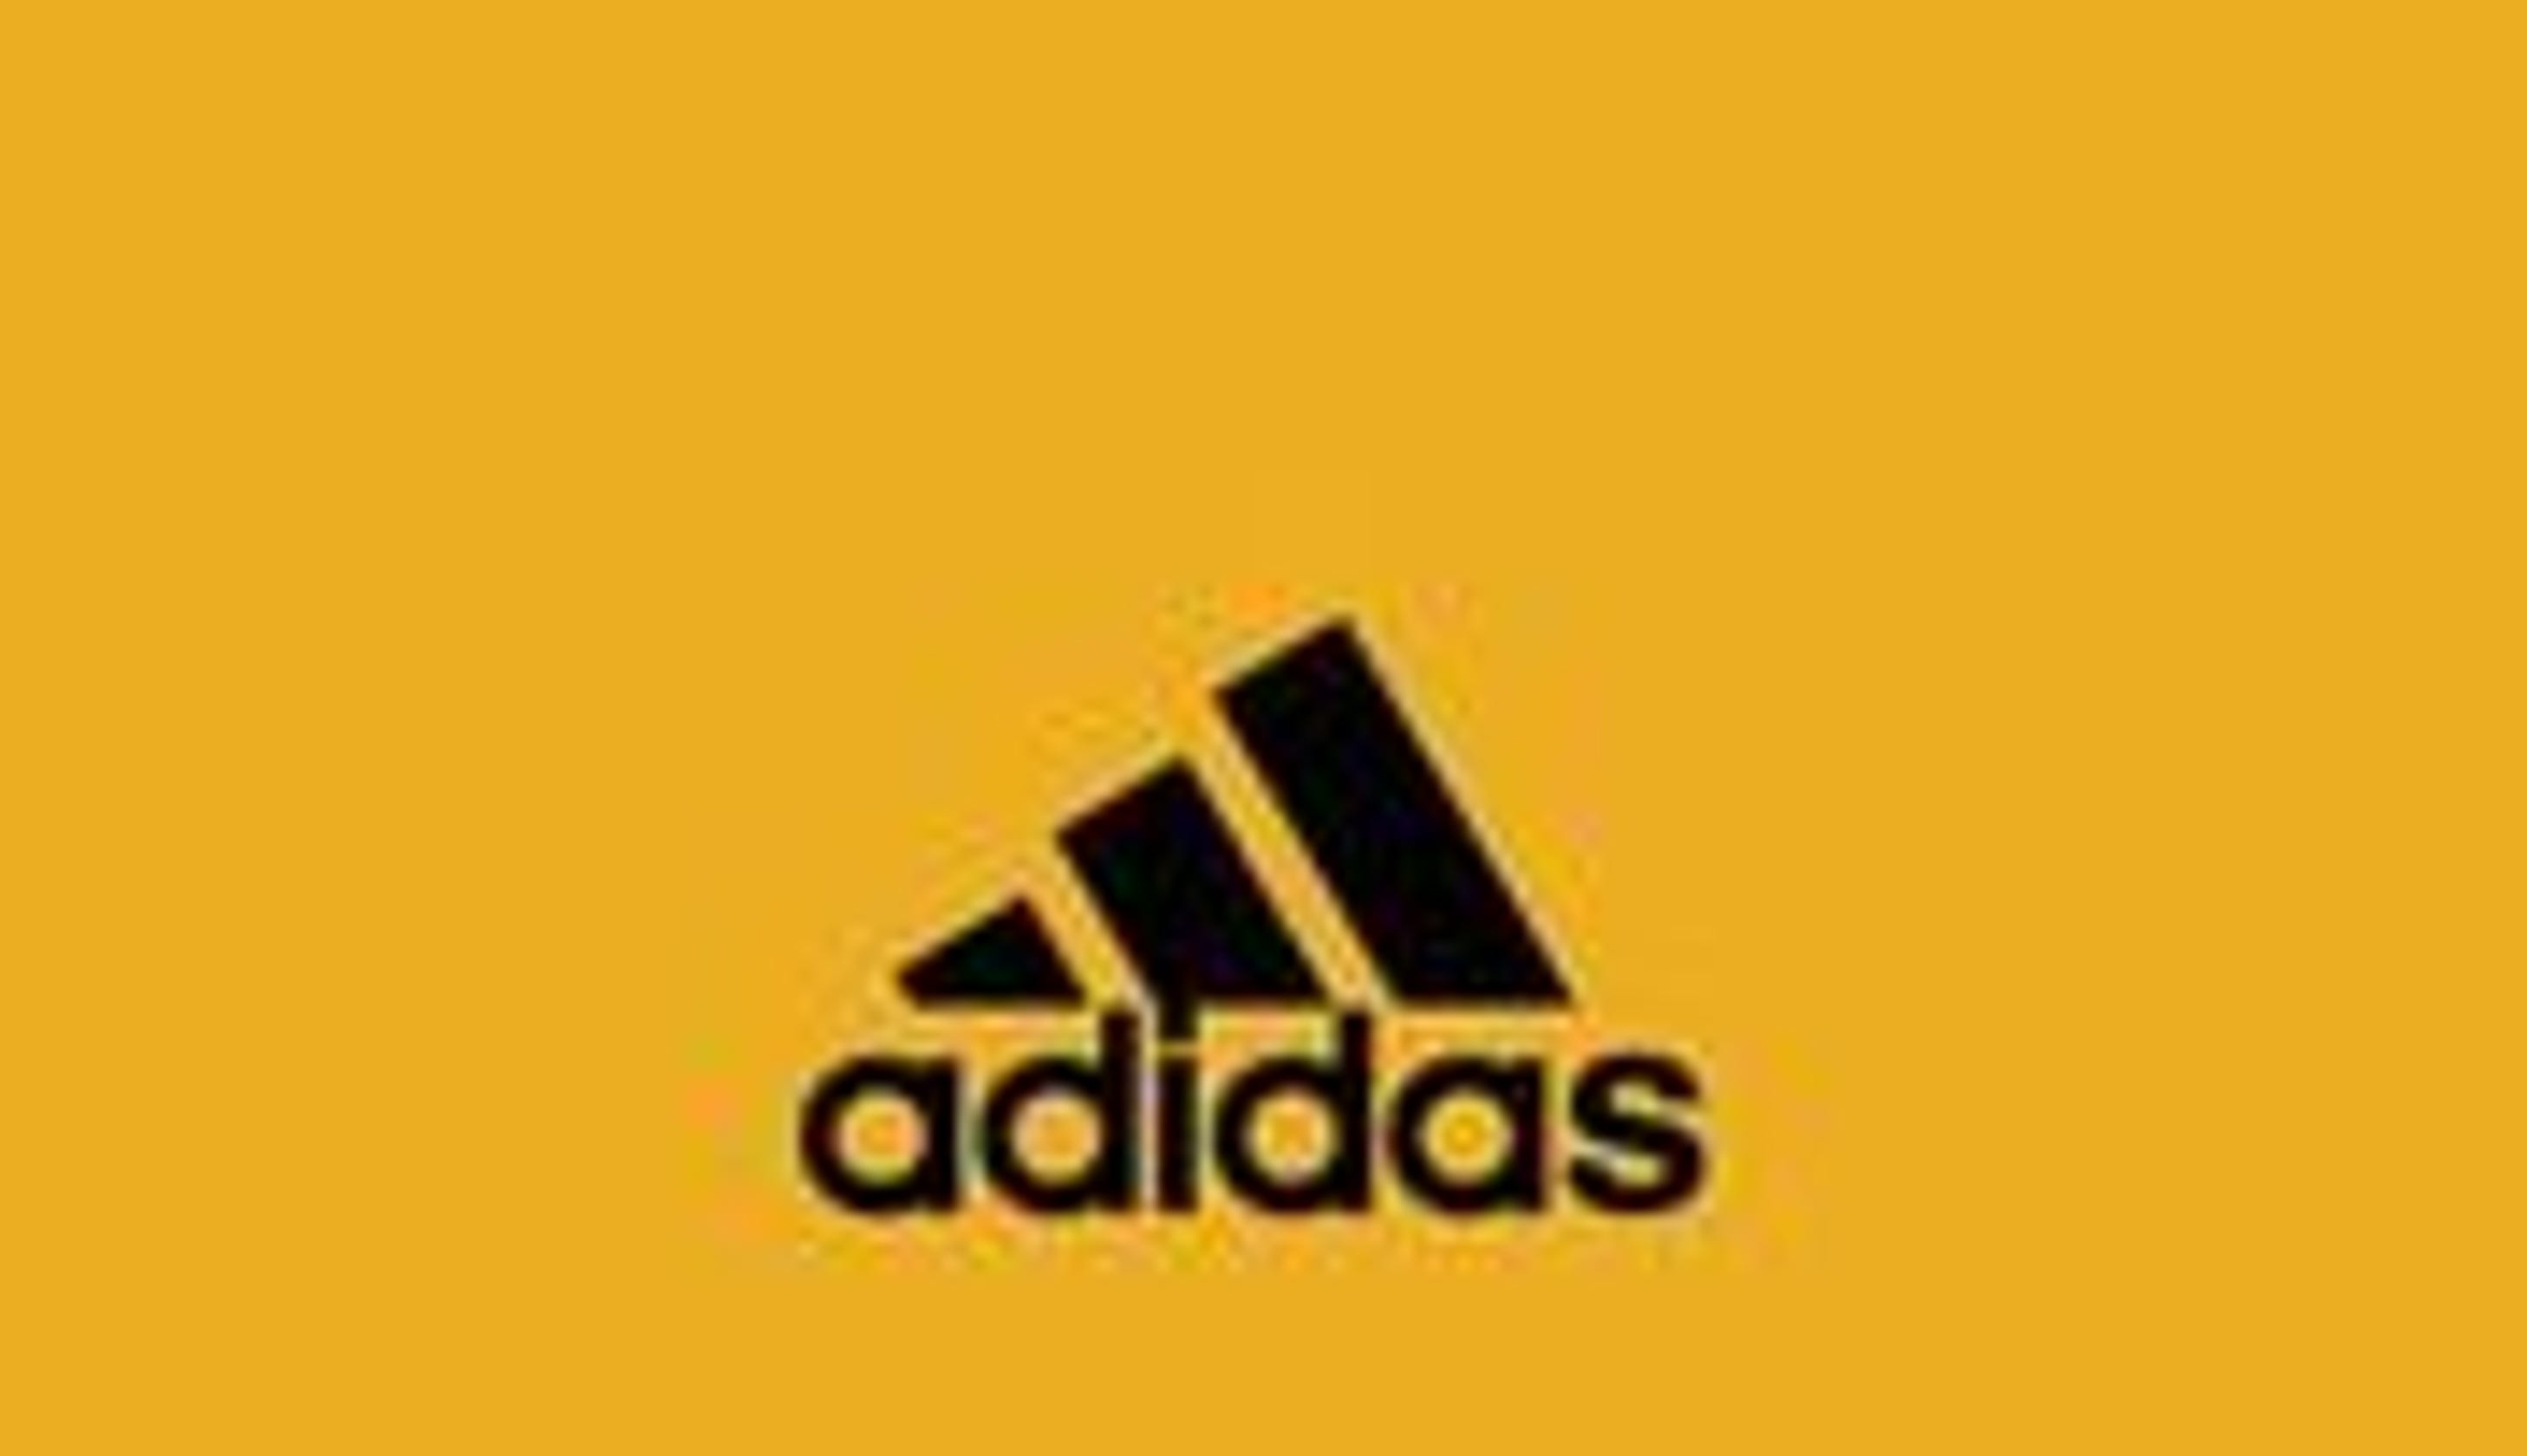 Beyonce teams up with Adidas to create shoes, clothing and Ivy Park2915 x 1680